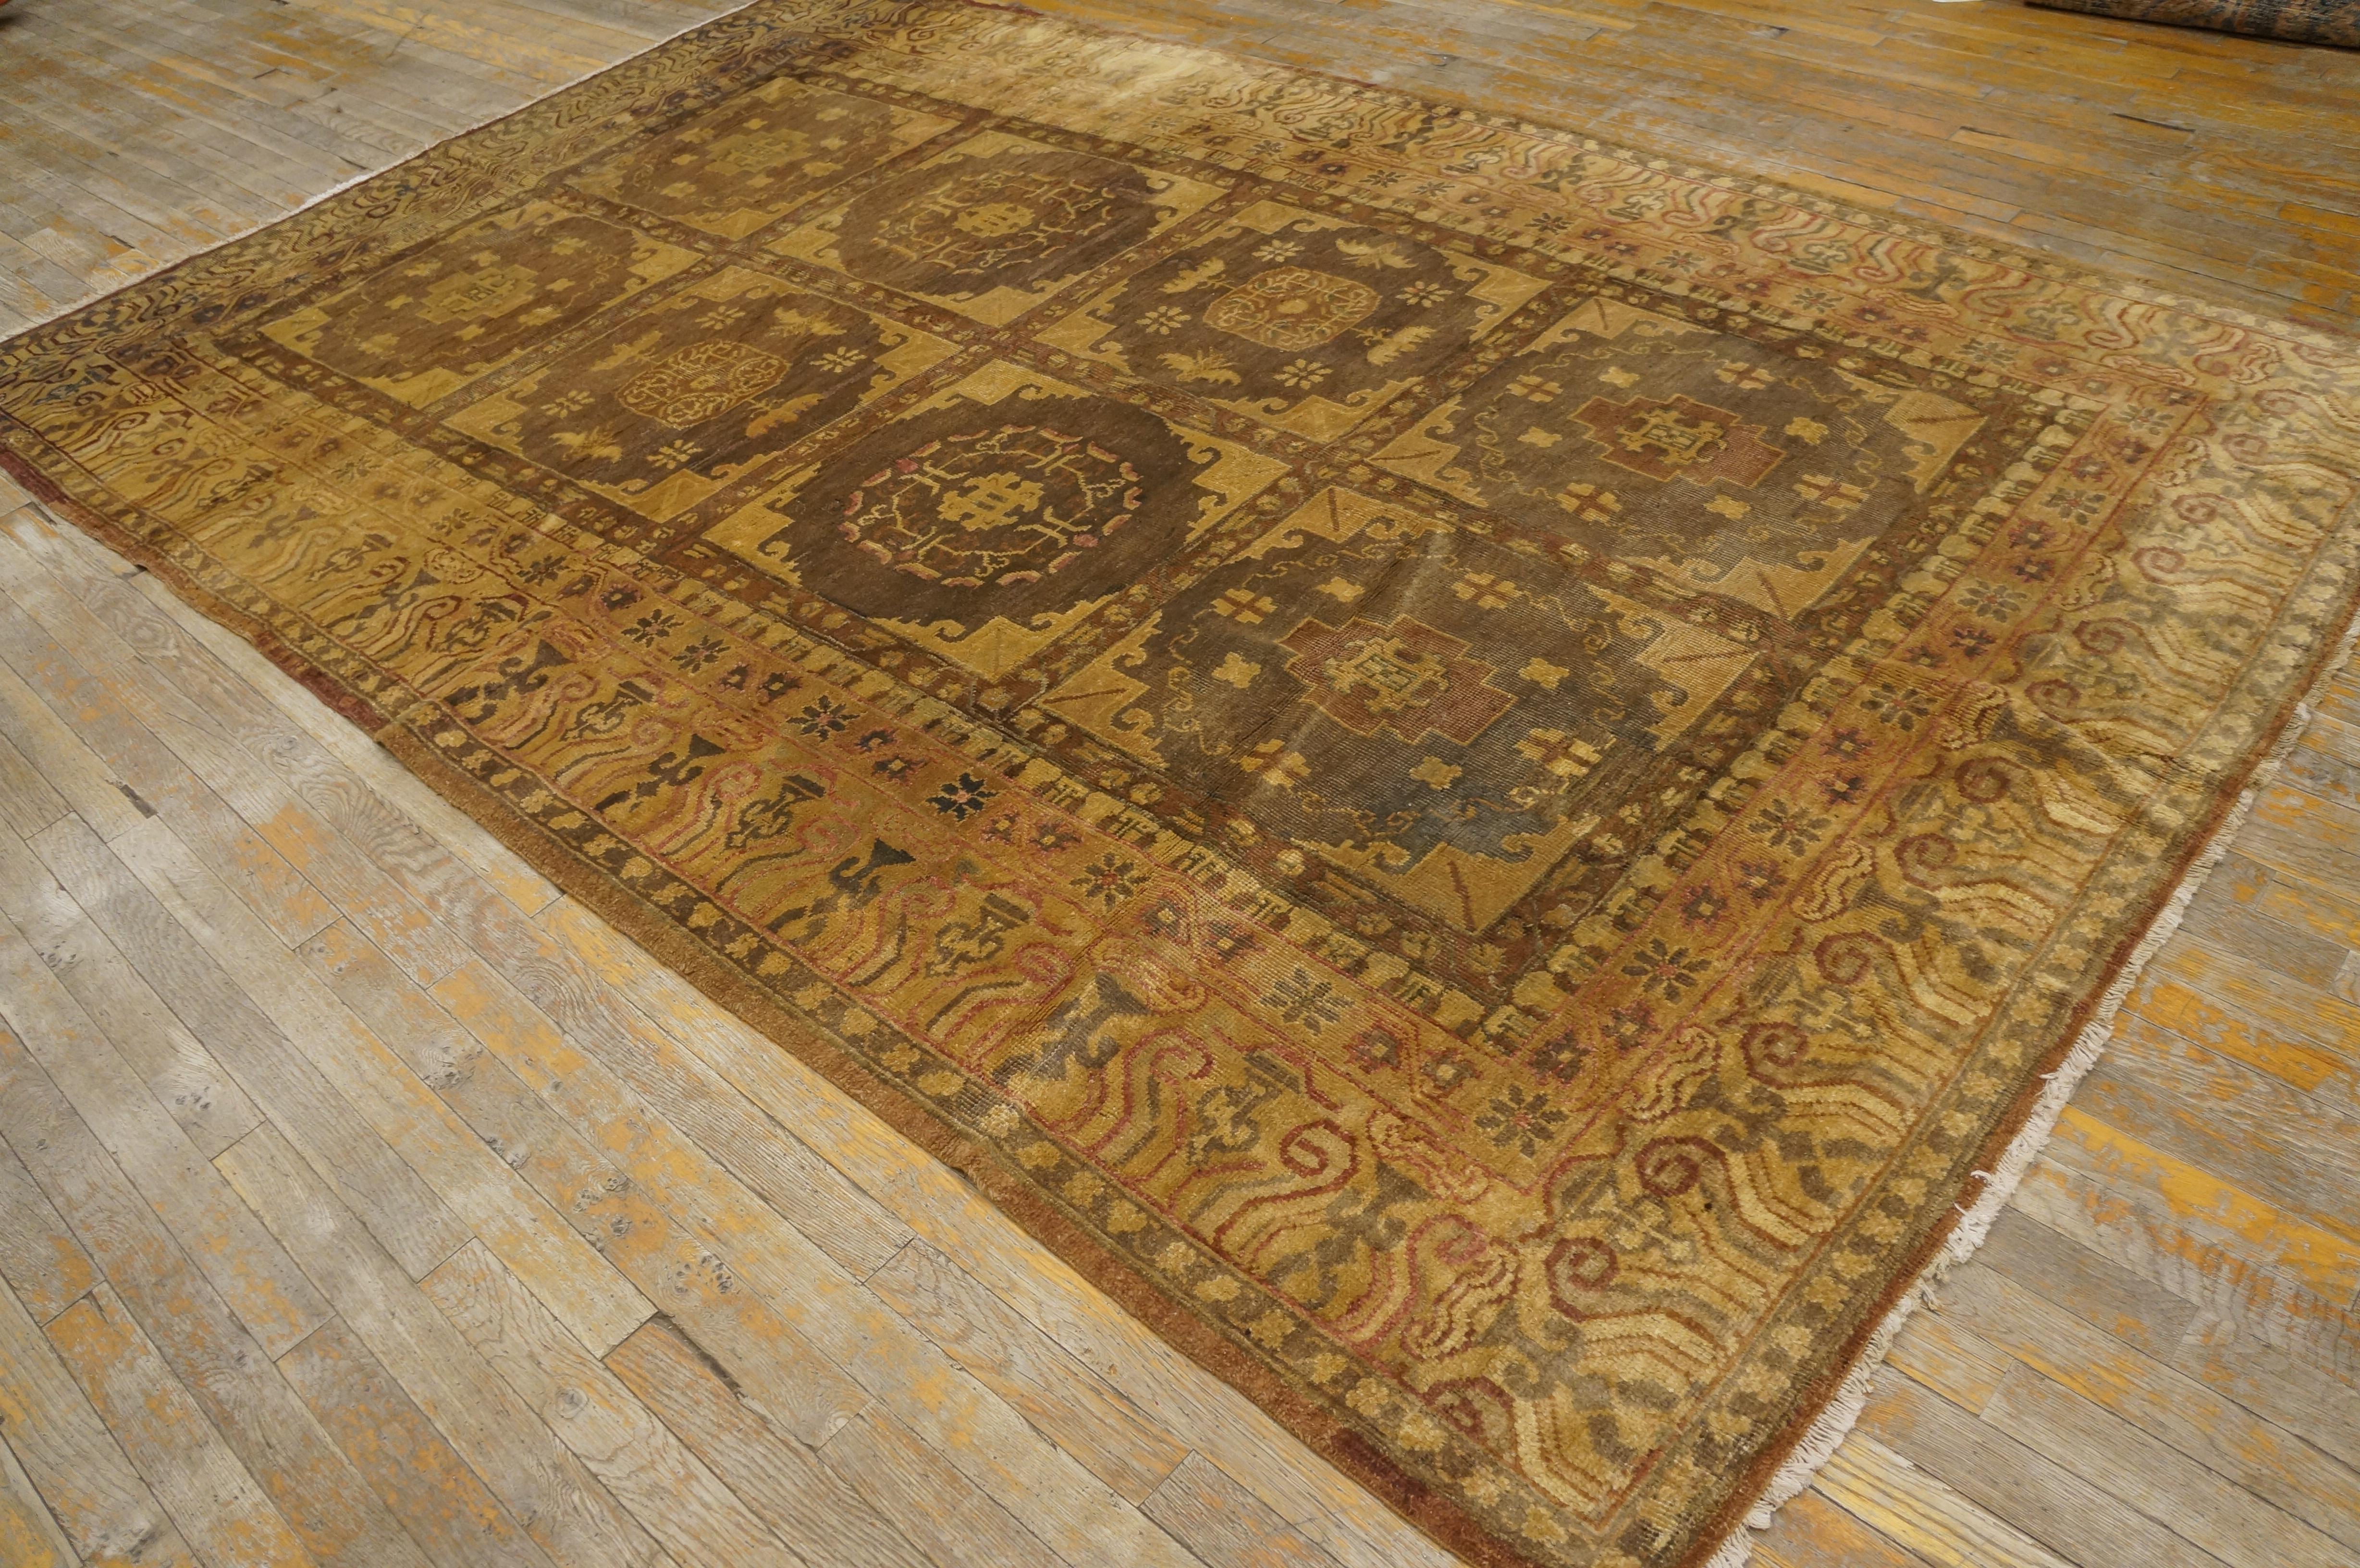 Wool Early 20th Century Central Asian Chinese Khotan Carpet (6'3